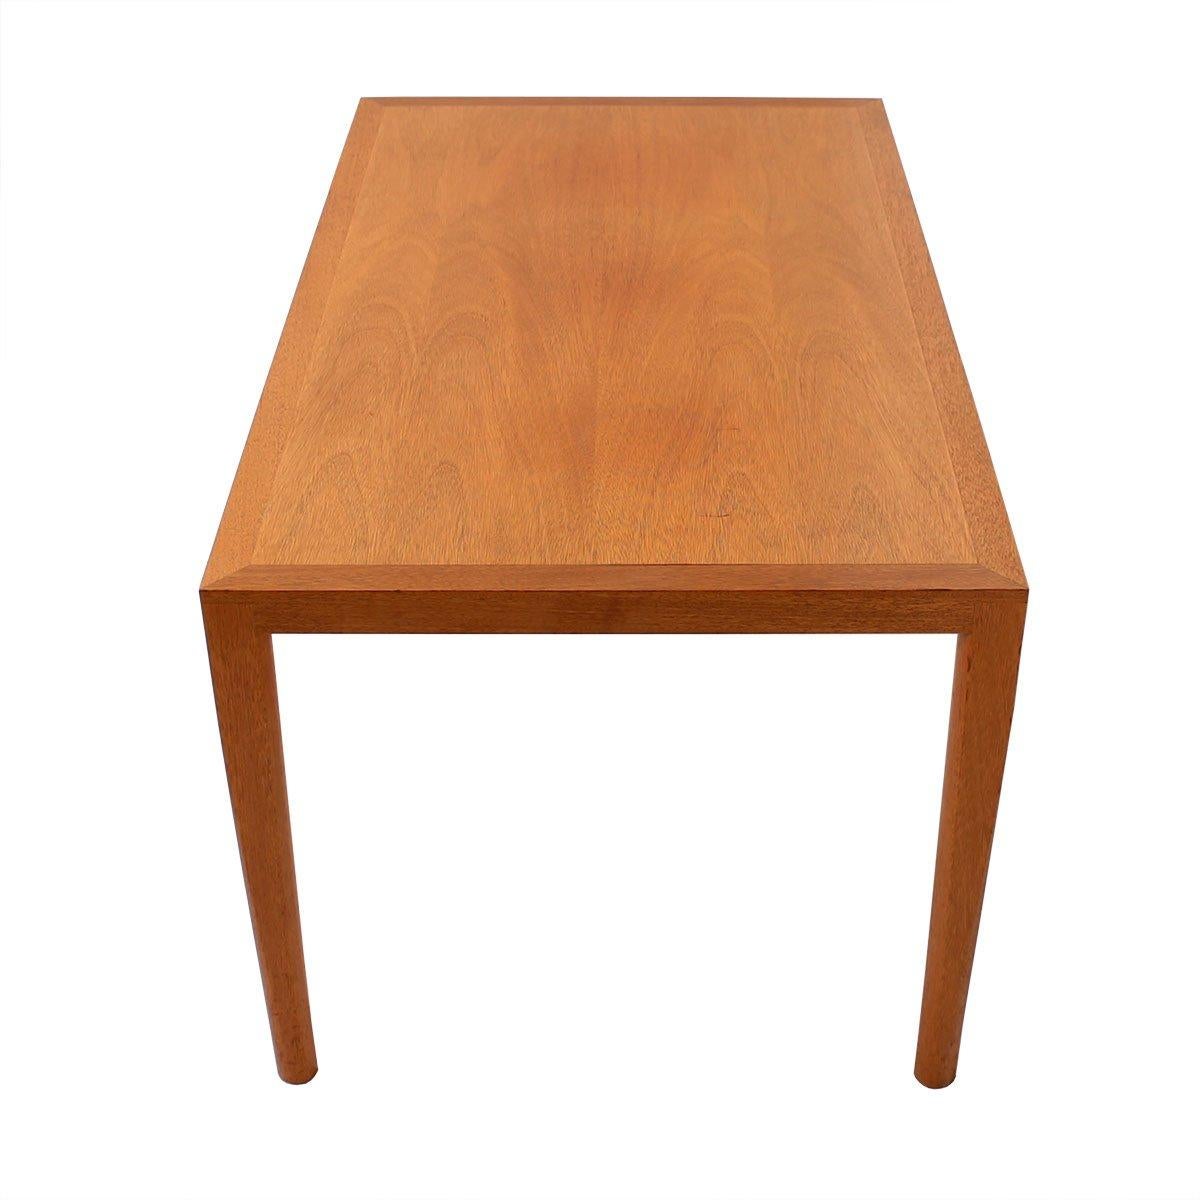 Danish midcentury Tall Rectangular Coffee Table

Additional information:
midcentury Table with Leg Joinery + Edge Banding.
Acquired from the Royal Danish Embassy in Washington, DC.

Dimension: W 39.5? x D 23.5? x H 20.5?.